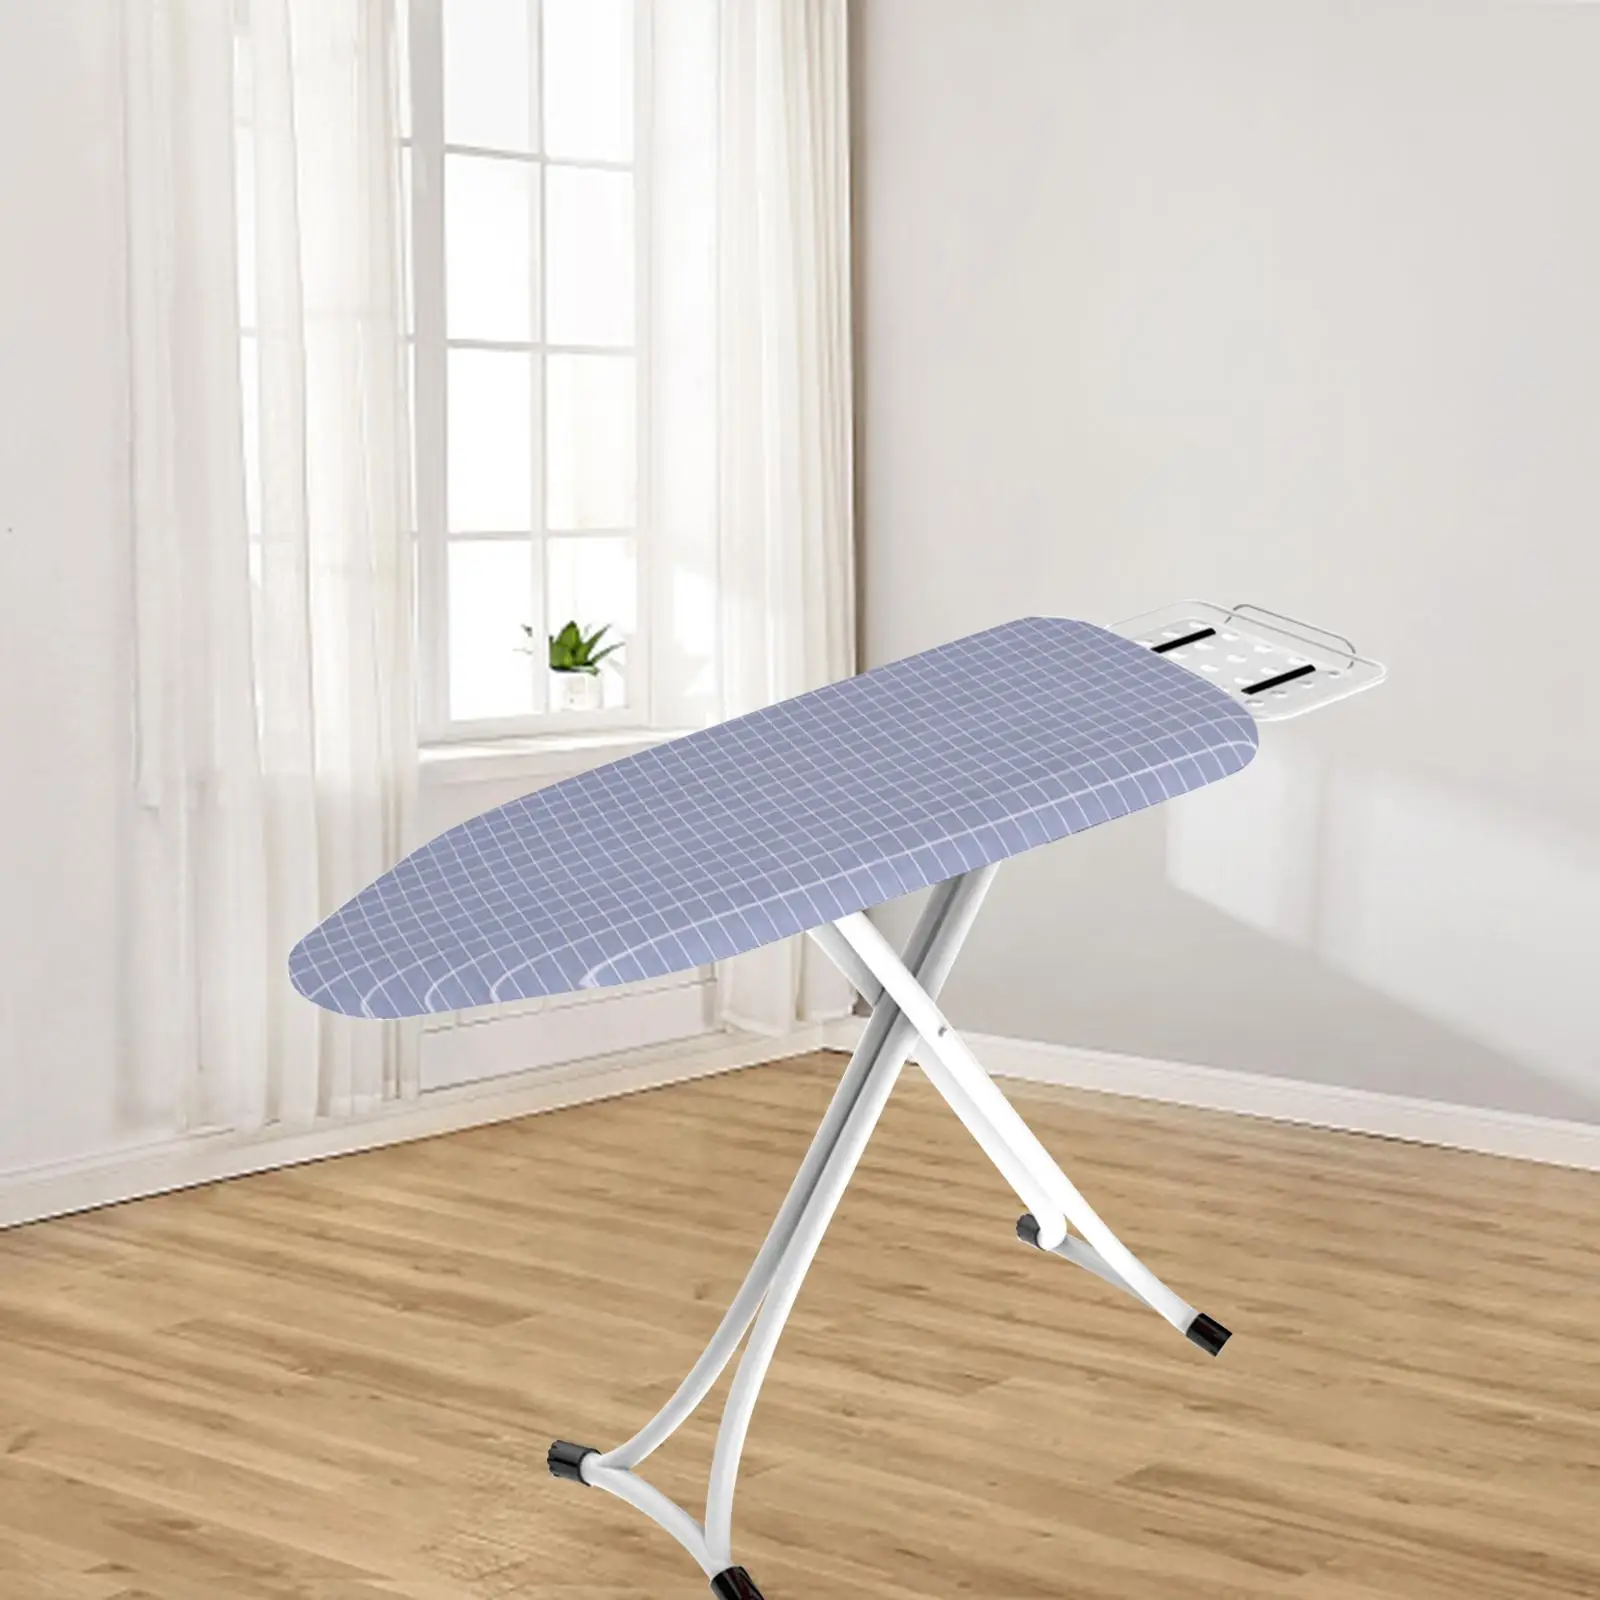 Elastic Ironing Board Cover Resists Scorching Heat Insulation Stain Resistant Ironing Table Cover Protector Laundry Supplies